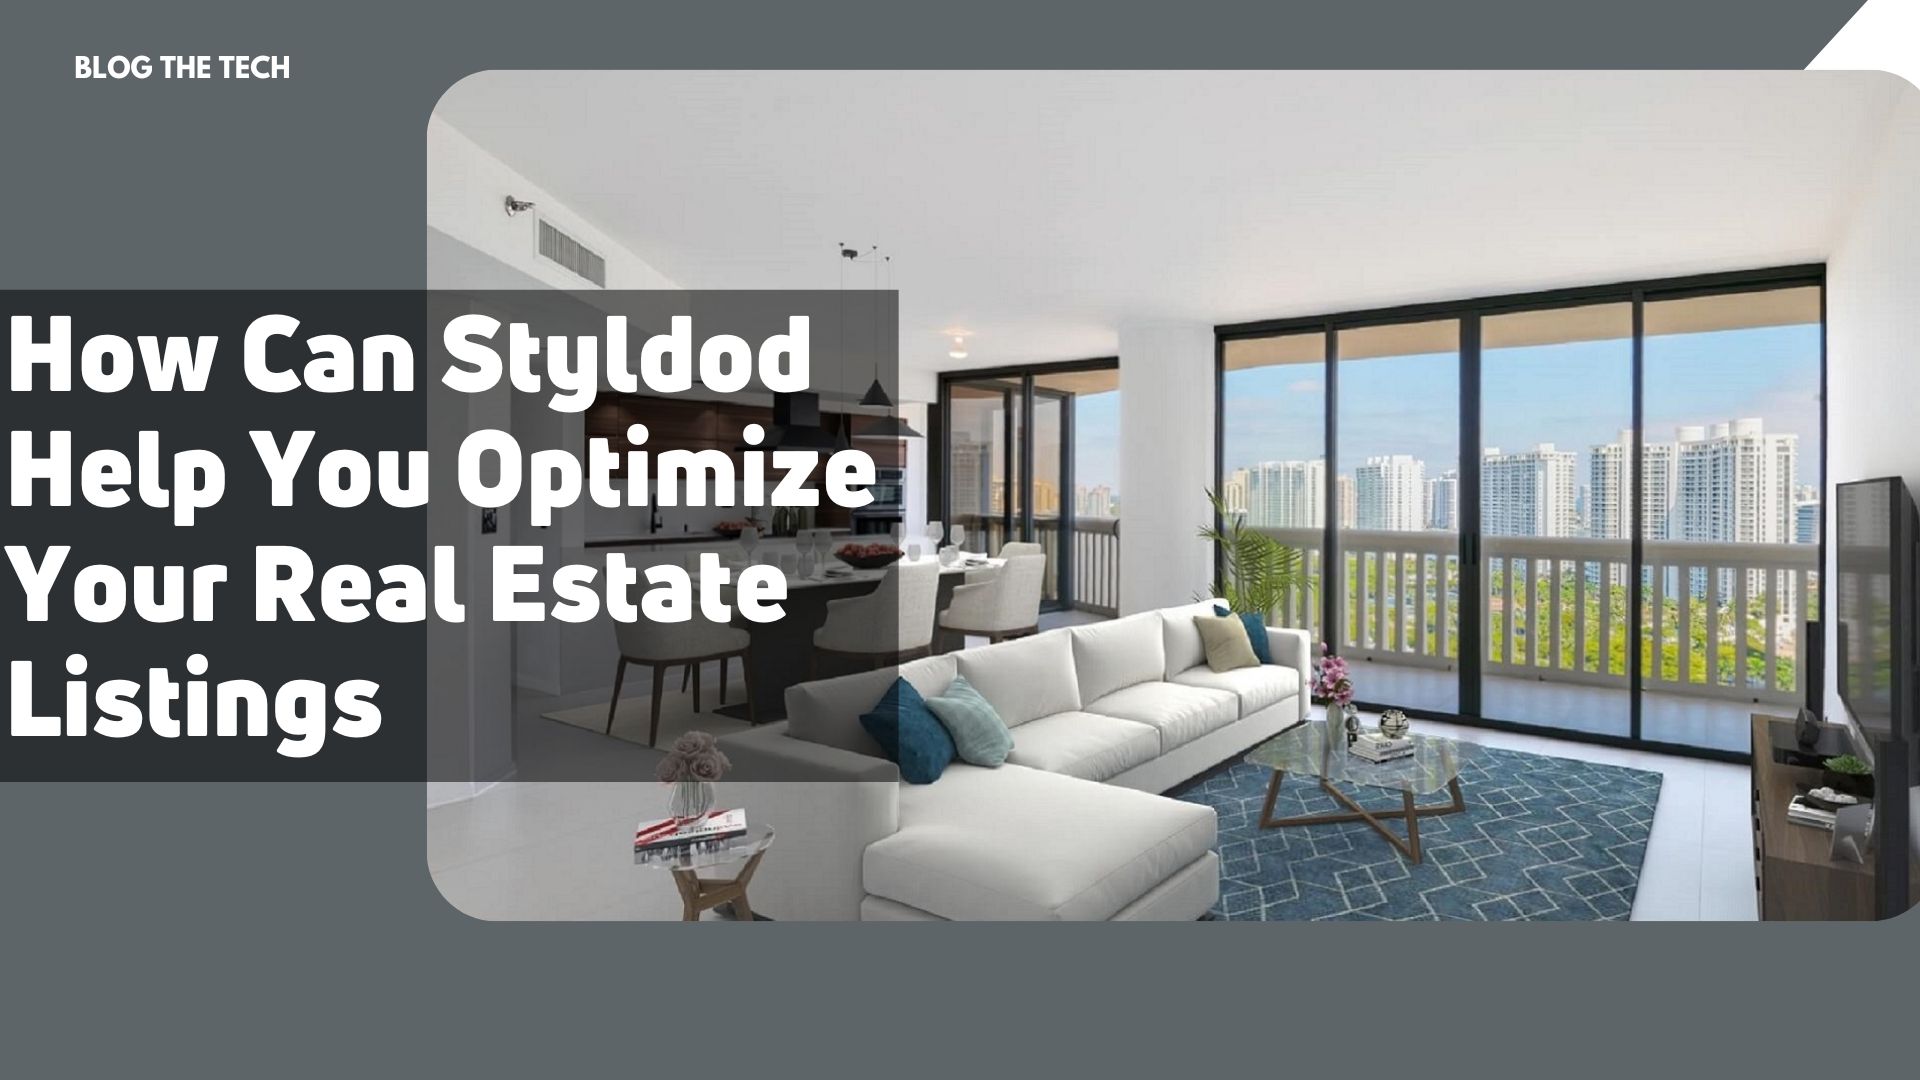 Styldod Help You Optimize Your Real Estate Listings